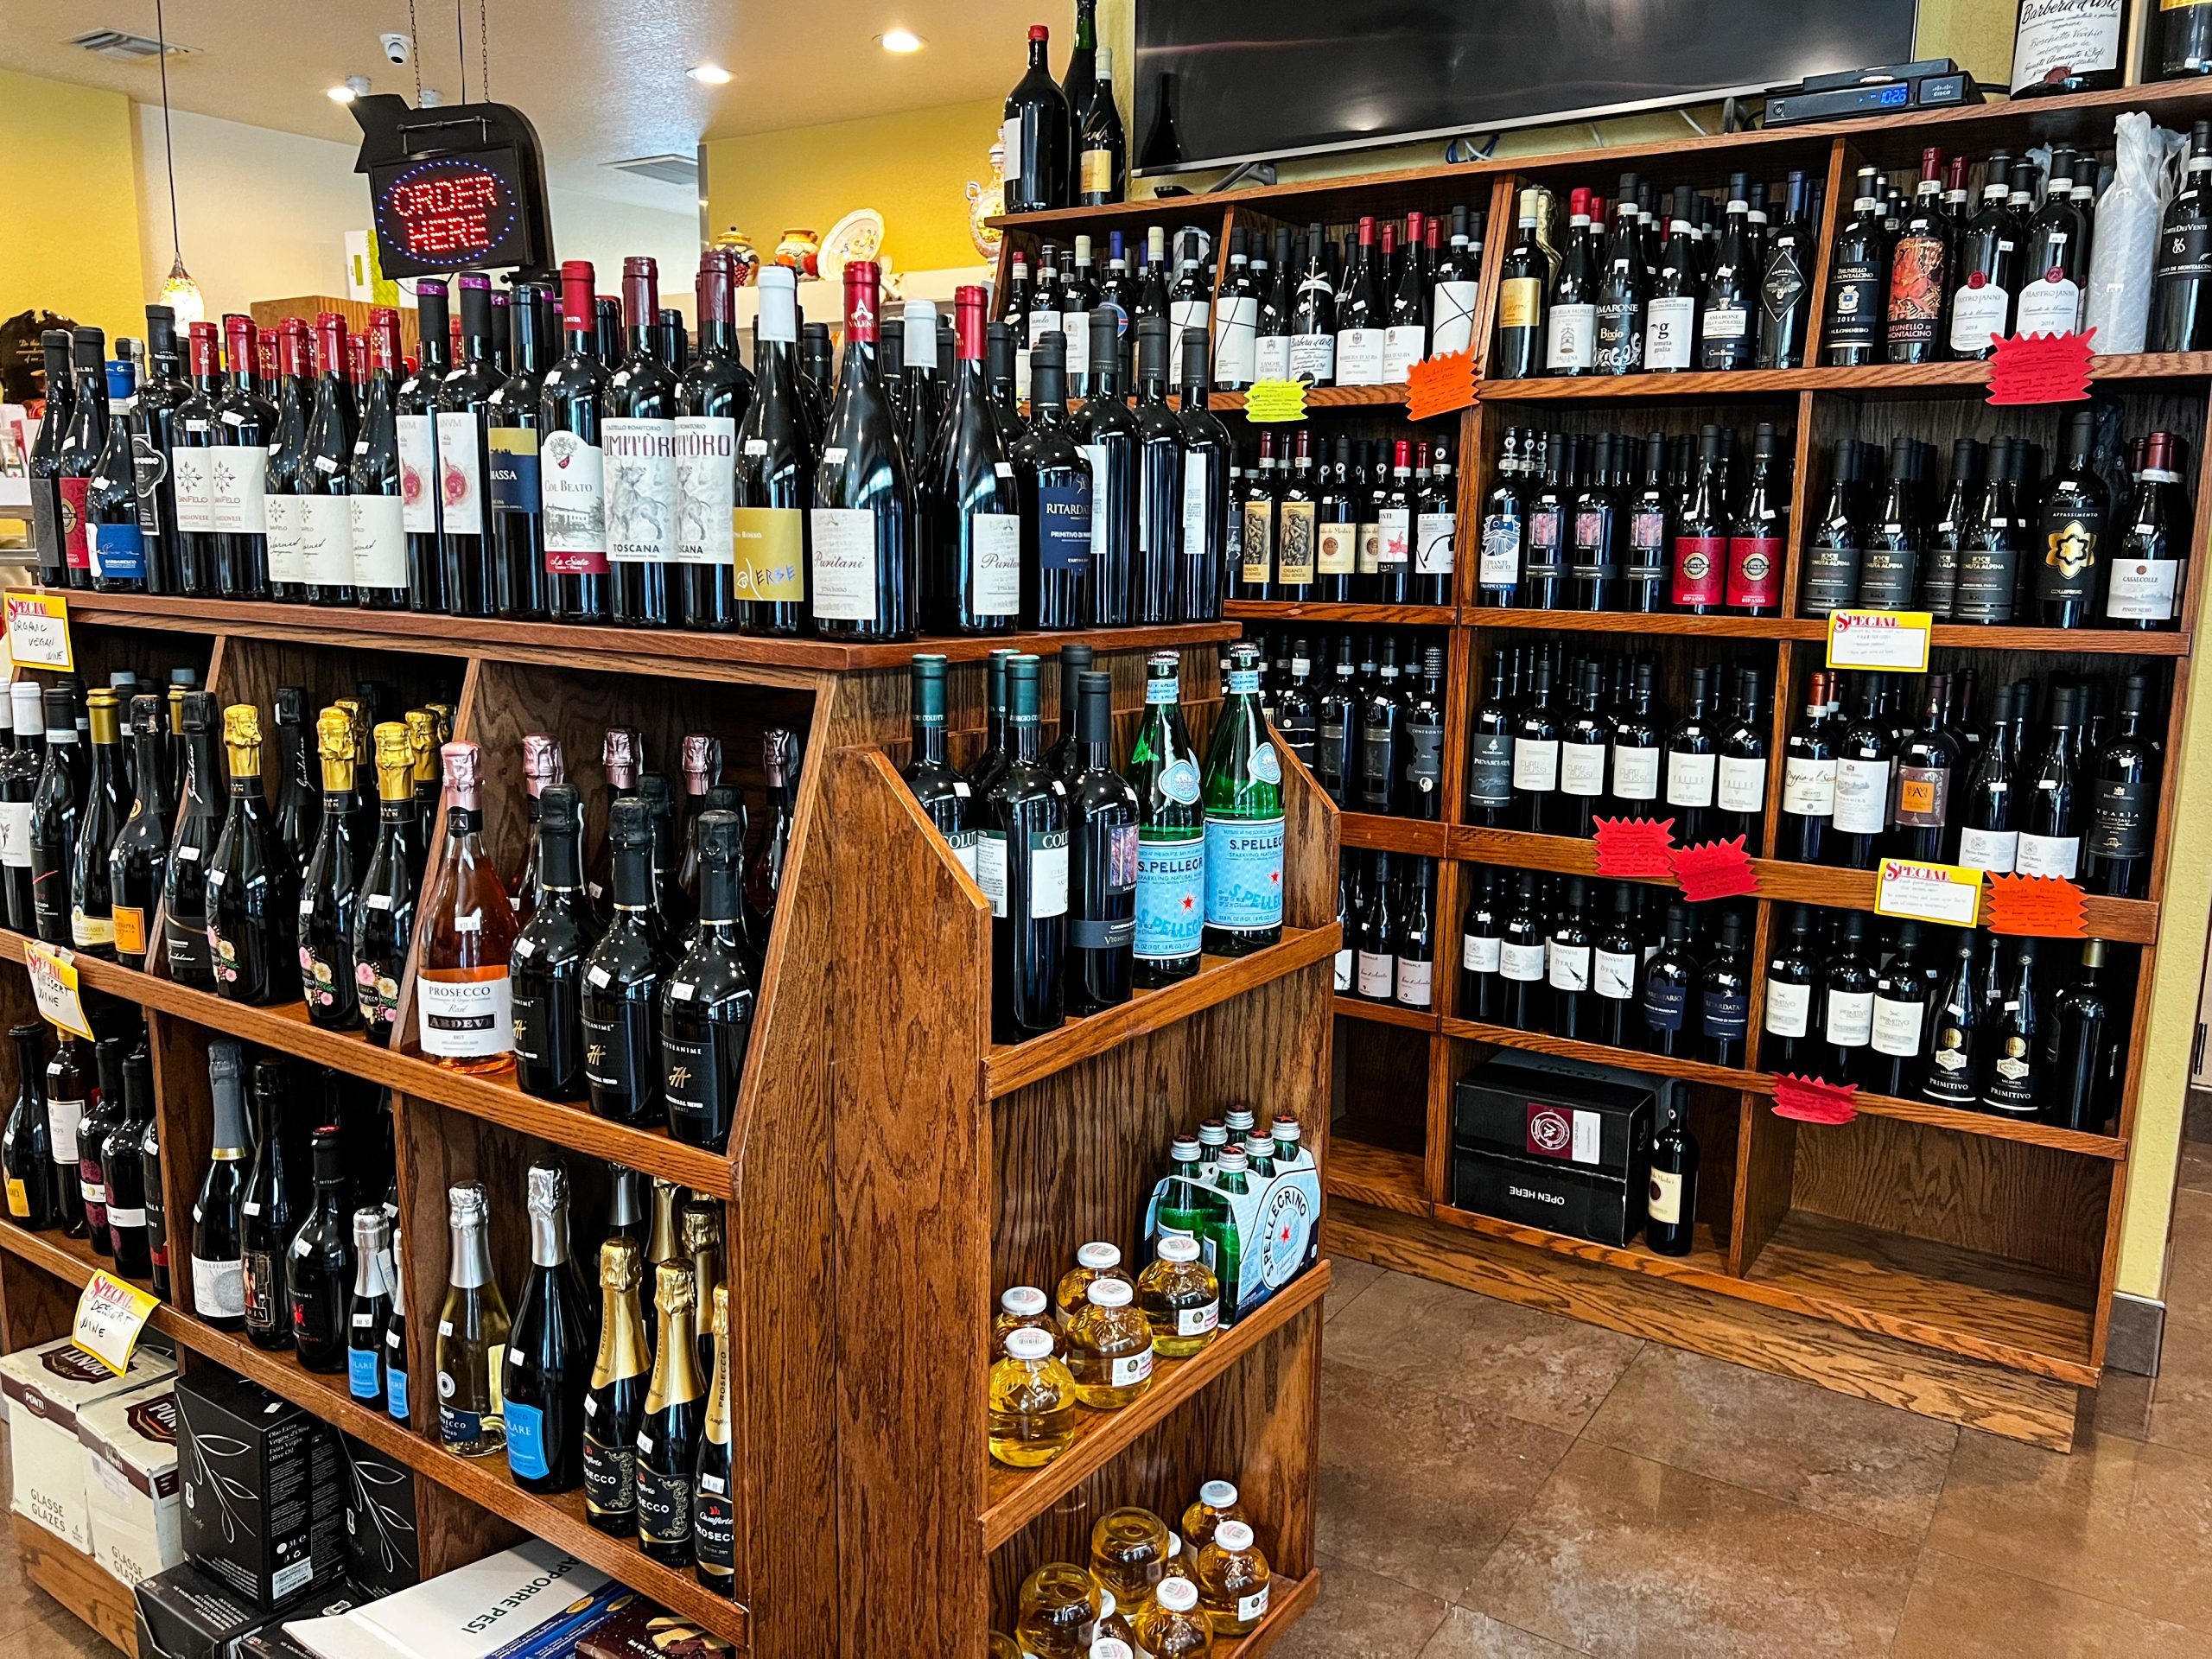 Fantastic selection of wines on the shelves